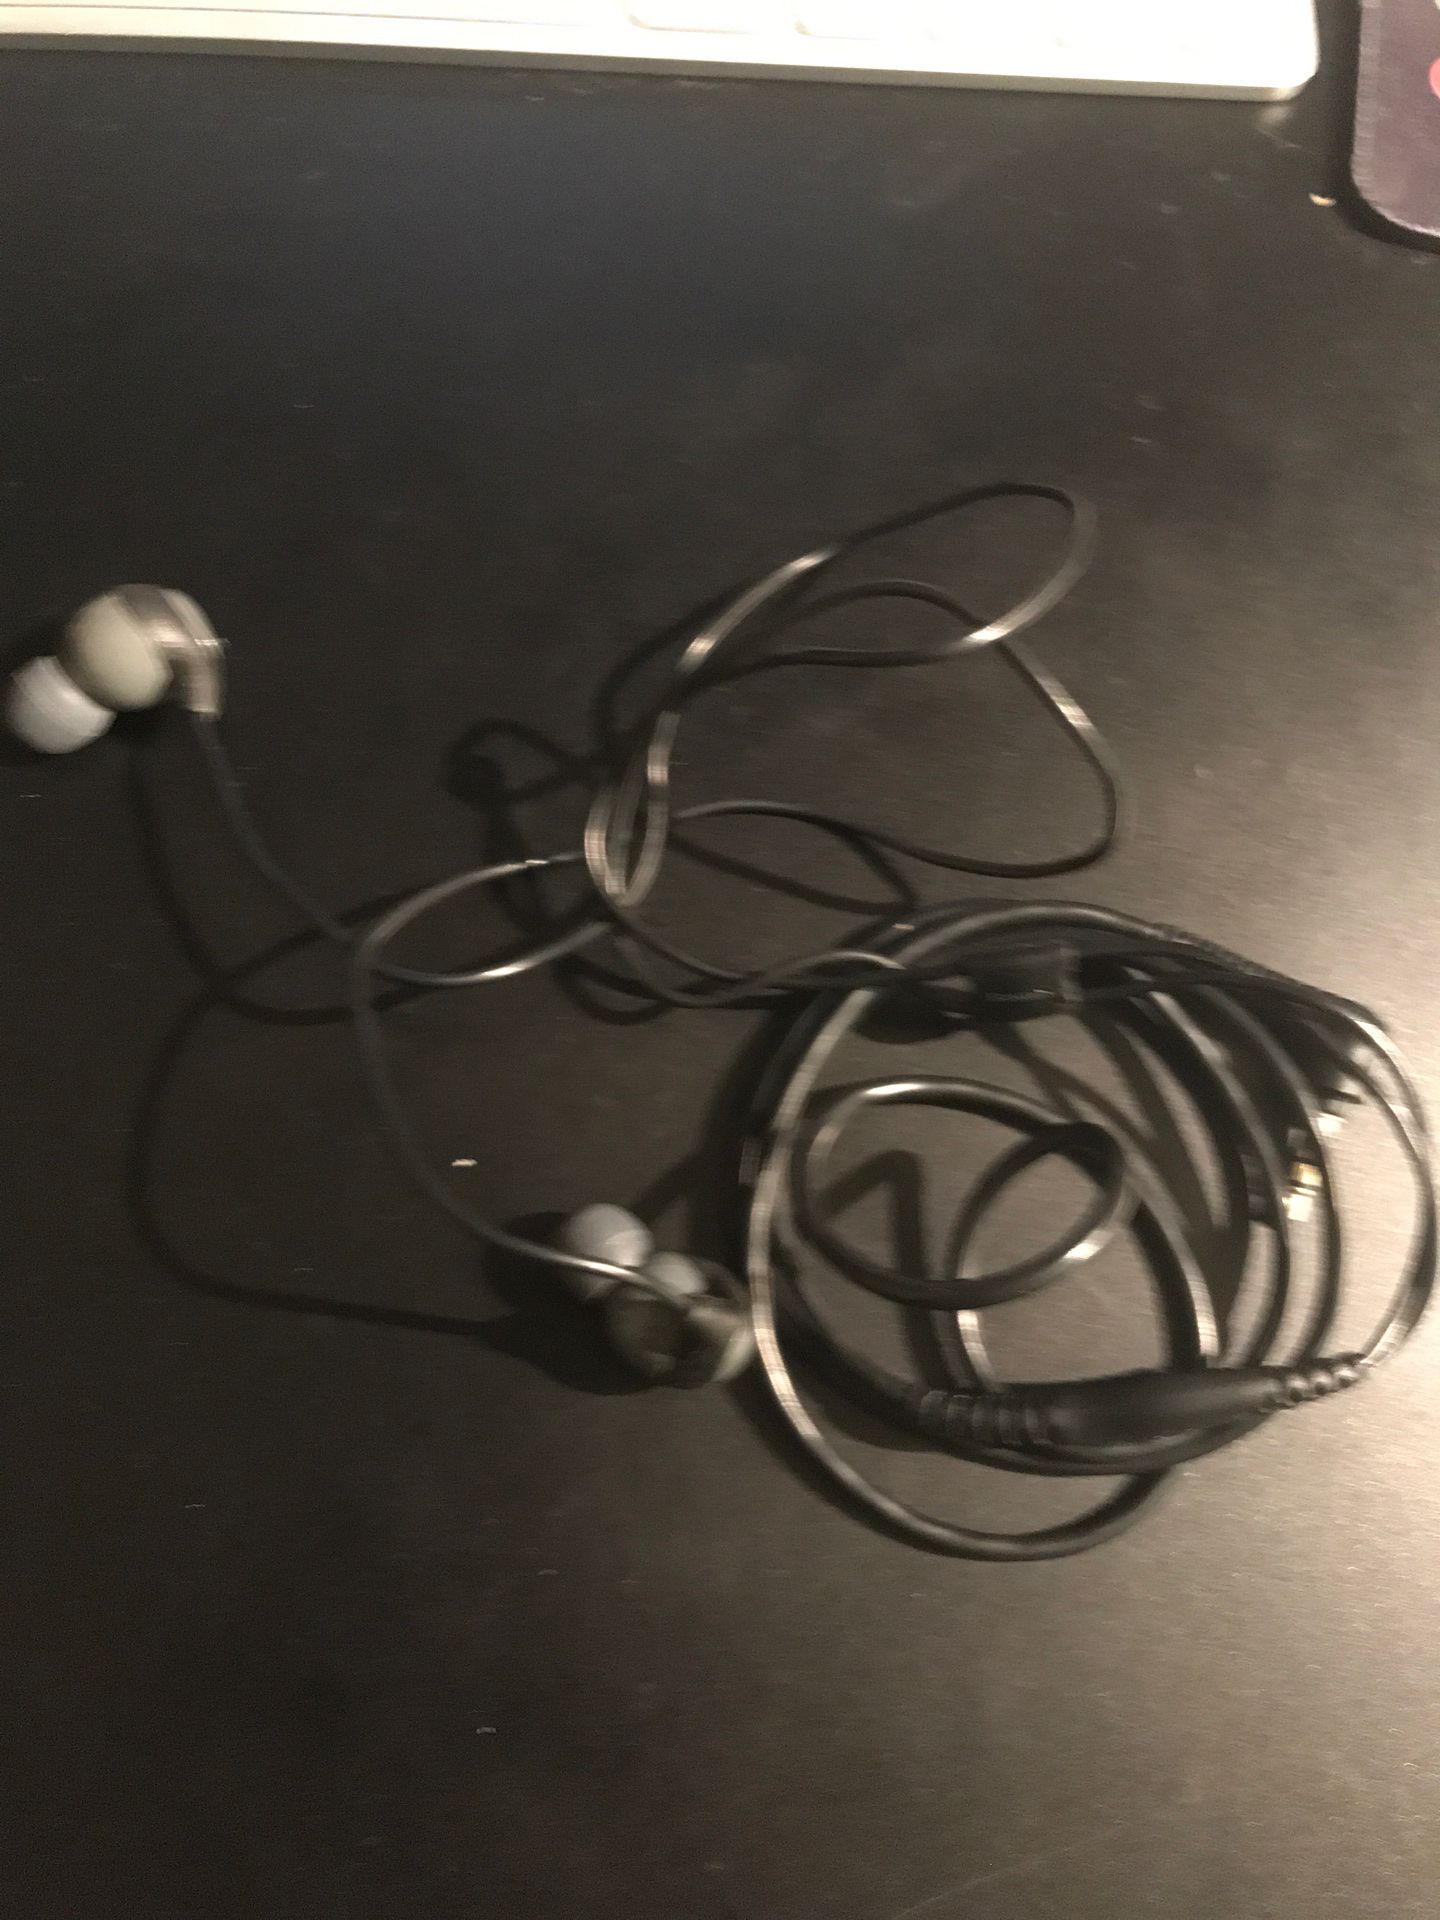 Shure 112 earbuds used tips on earpiece can be replaced